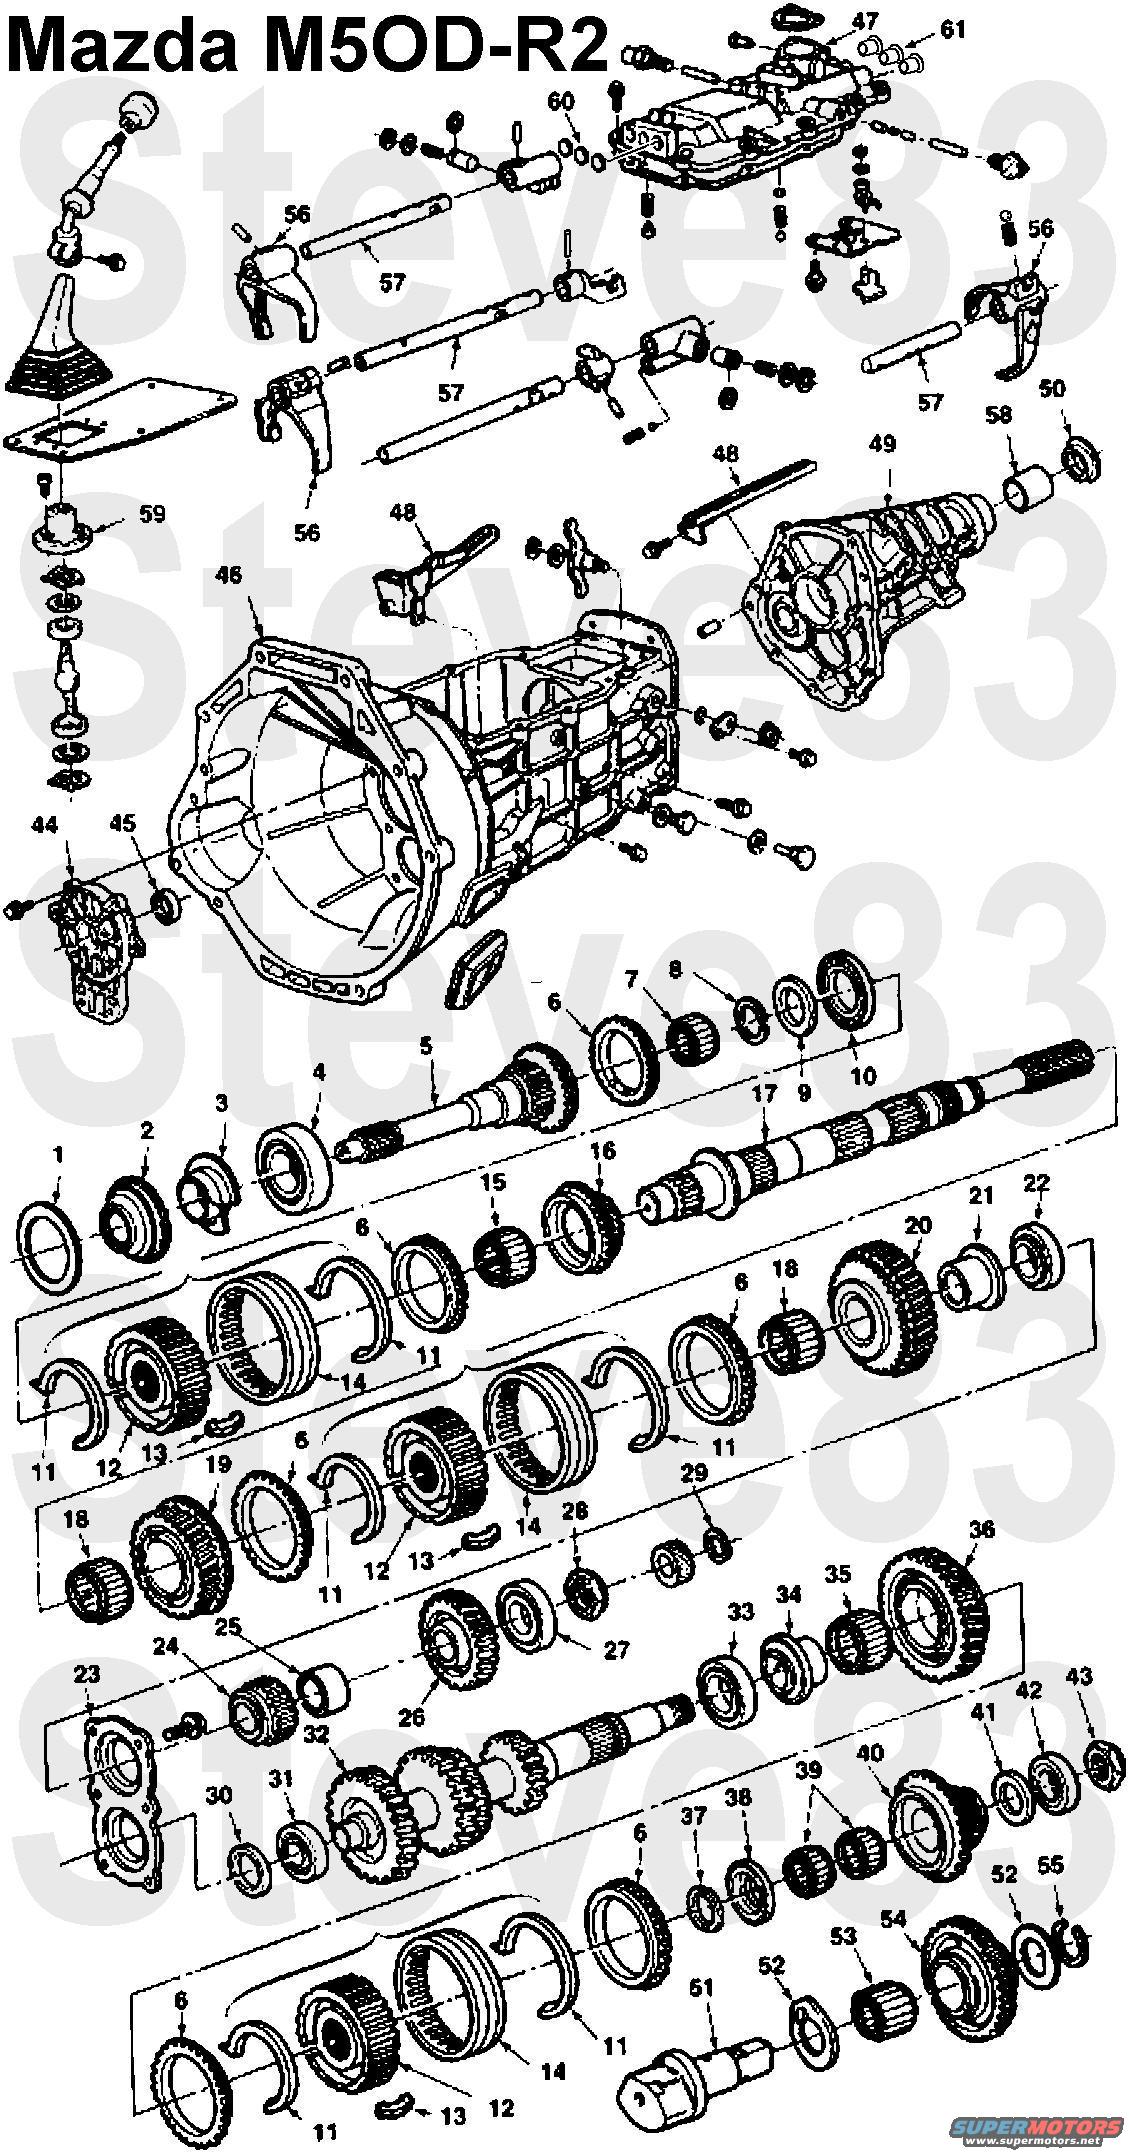 Ford m50d transmission exploded view #8